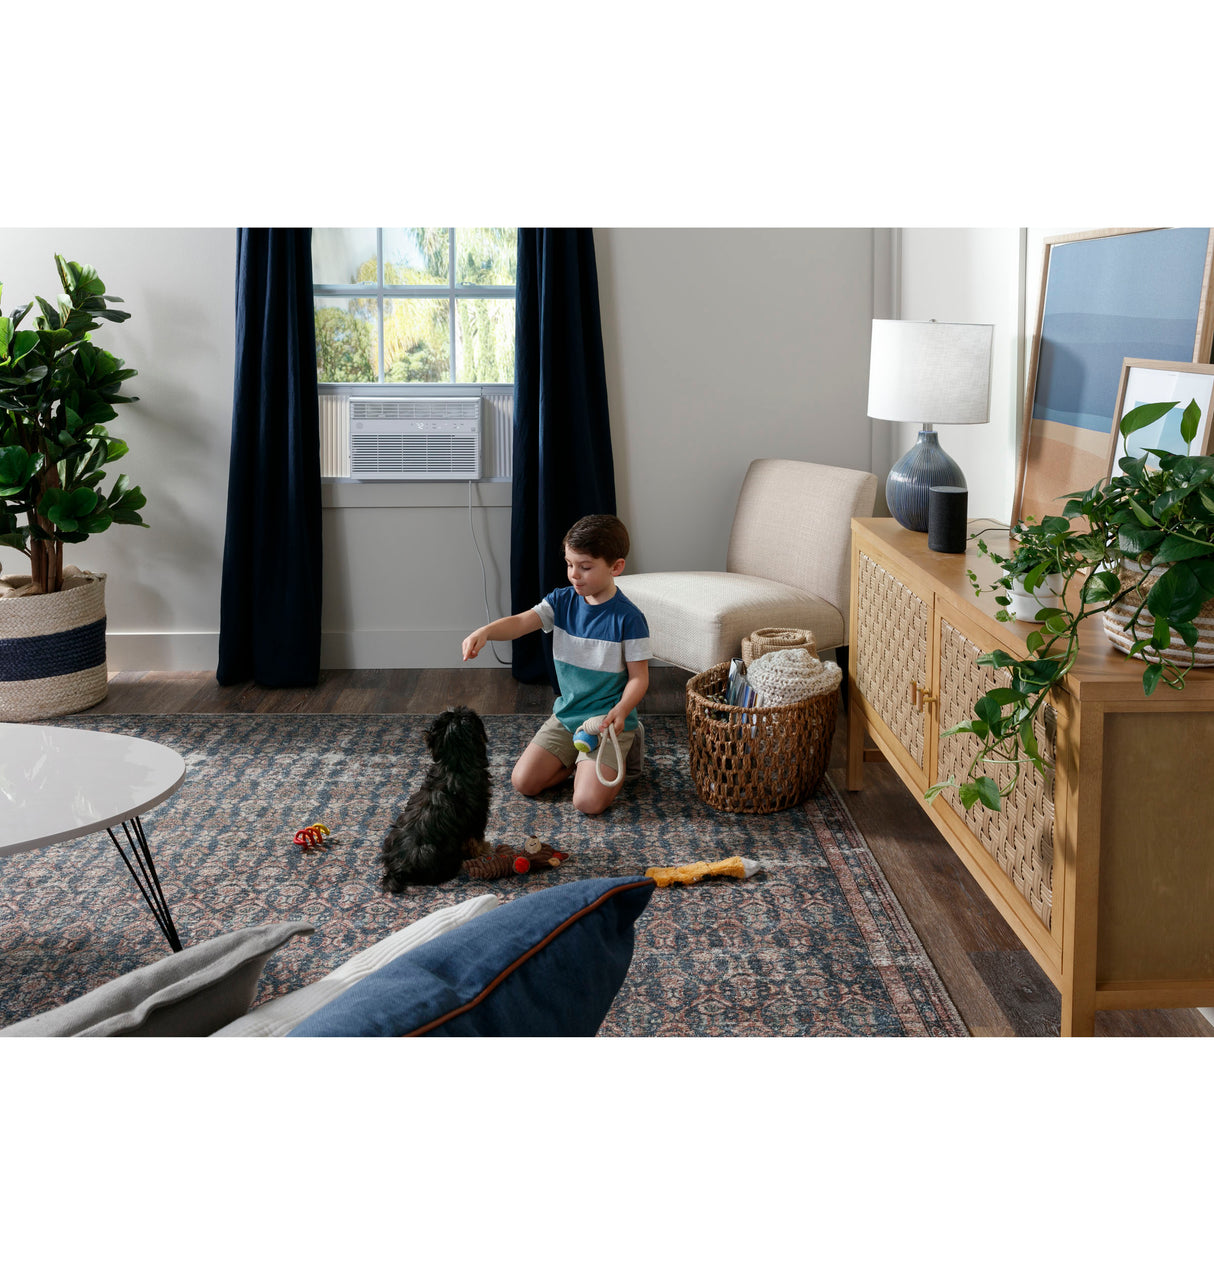 GE(R) 23,500 BTU Heat/Cool Electronic Window Air Conditioner for Extra-Large Rooms up to 1,500 sq. ft. - (AHE24DZ)